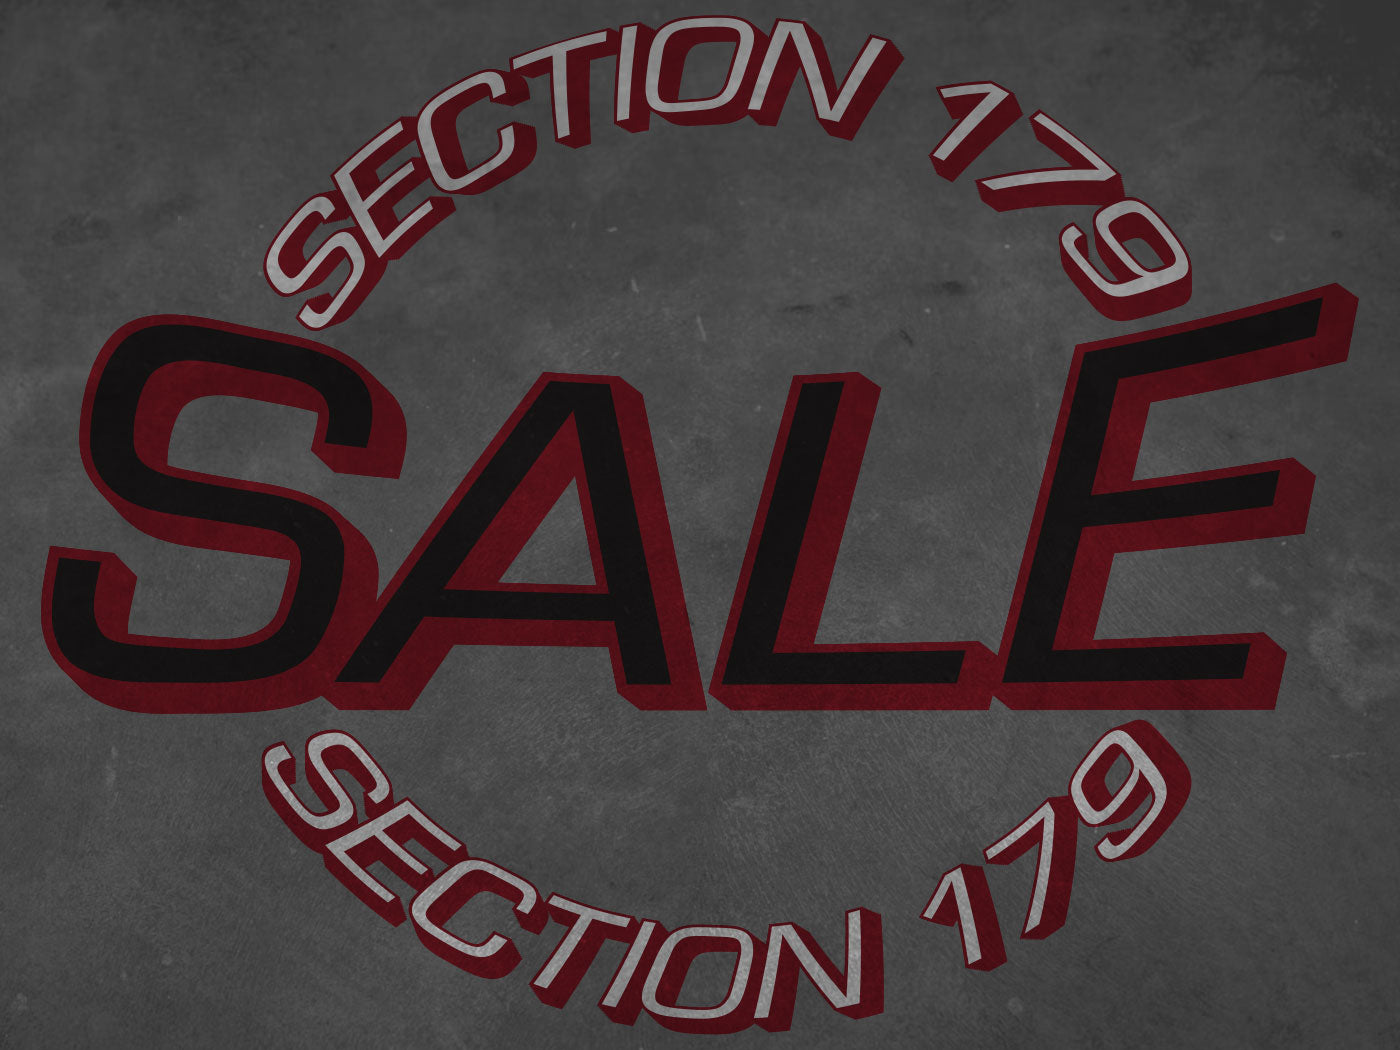 section-179-tax-sale-car-detailing